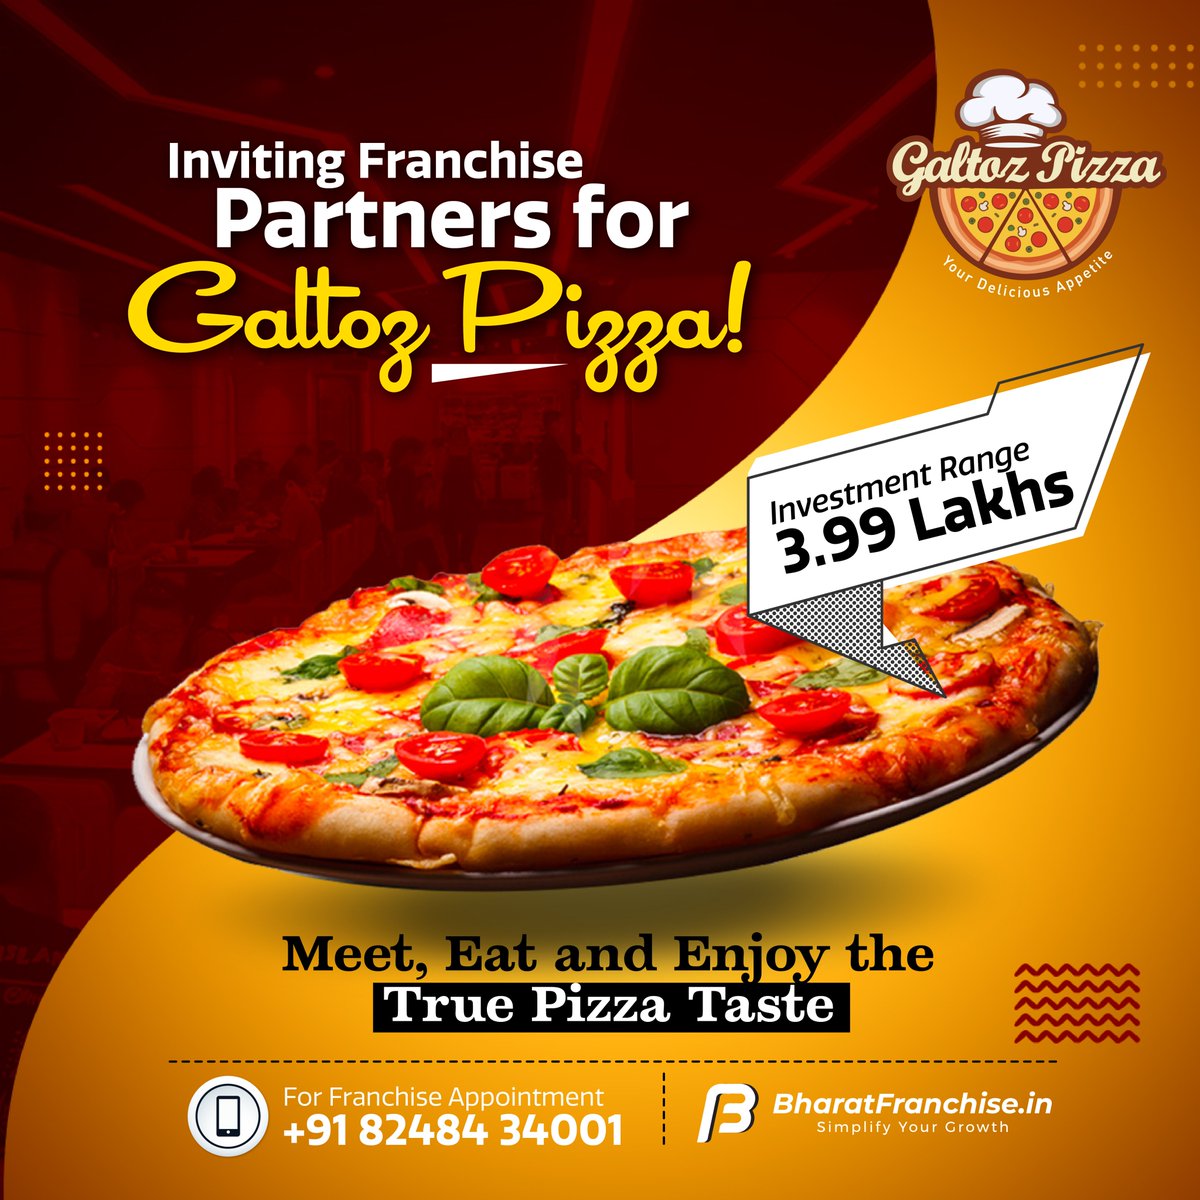 We are happy to onboard #GaltozPizza, a tasty pizza chain. Who Doesn't Love Pizza? Buying this franchise will help you make a good profit.

Call us at 82484 34001 for franchise appointments. 

#PizzaFranchise #QSRFranchise #BharatFranchise #franchisestrategy #franchisetraining